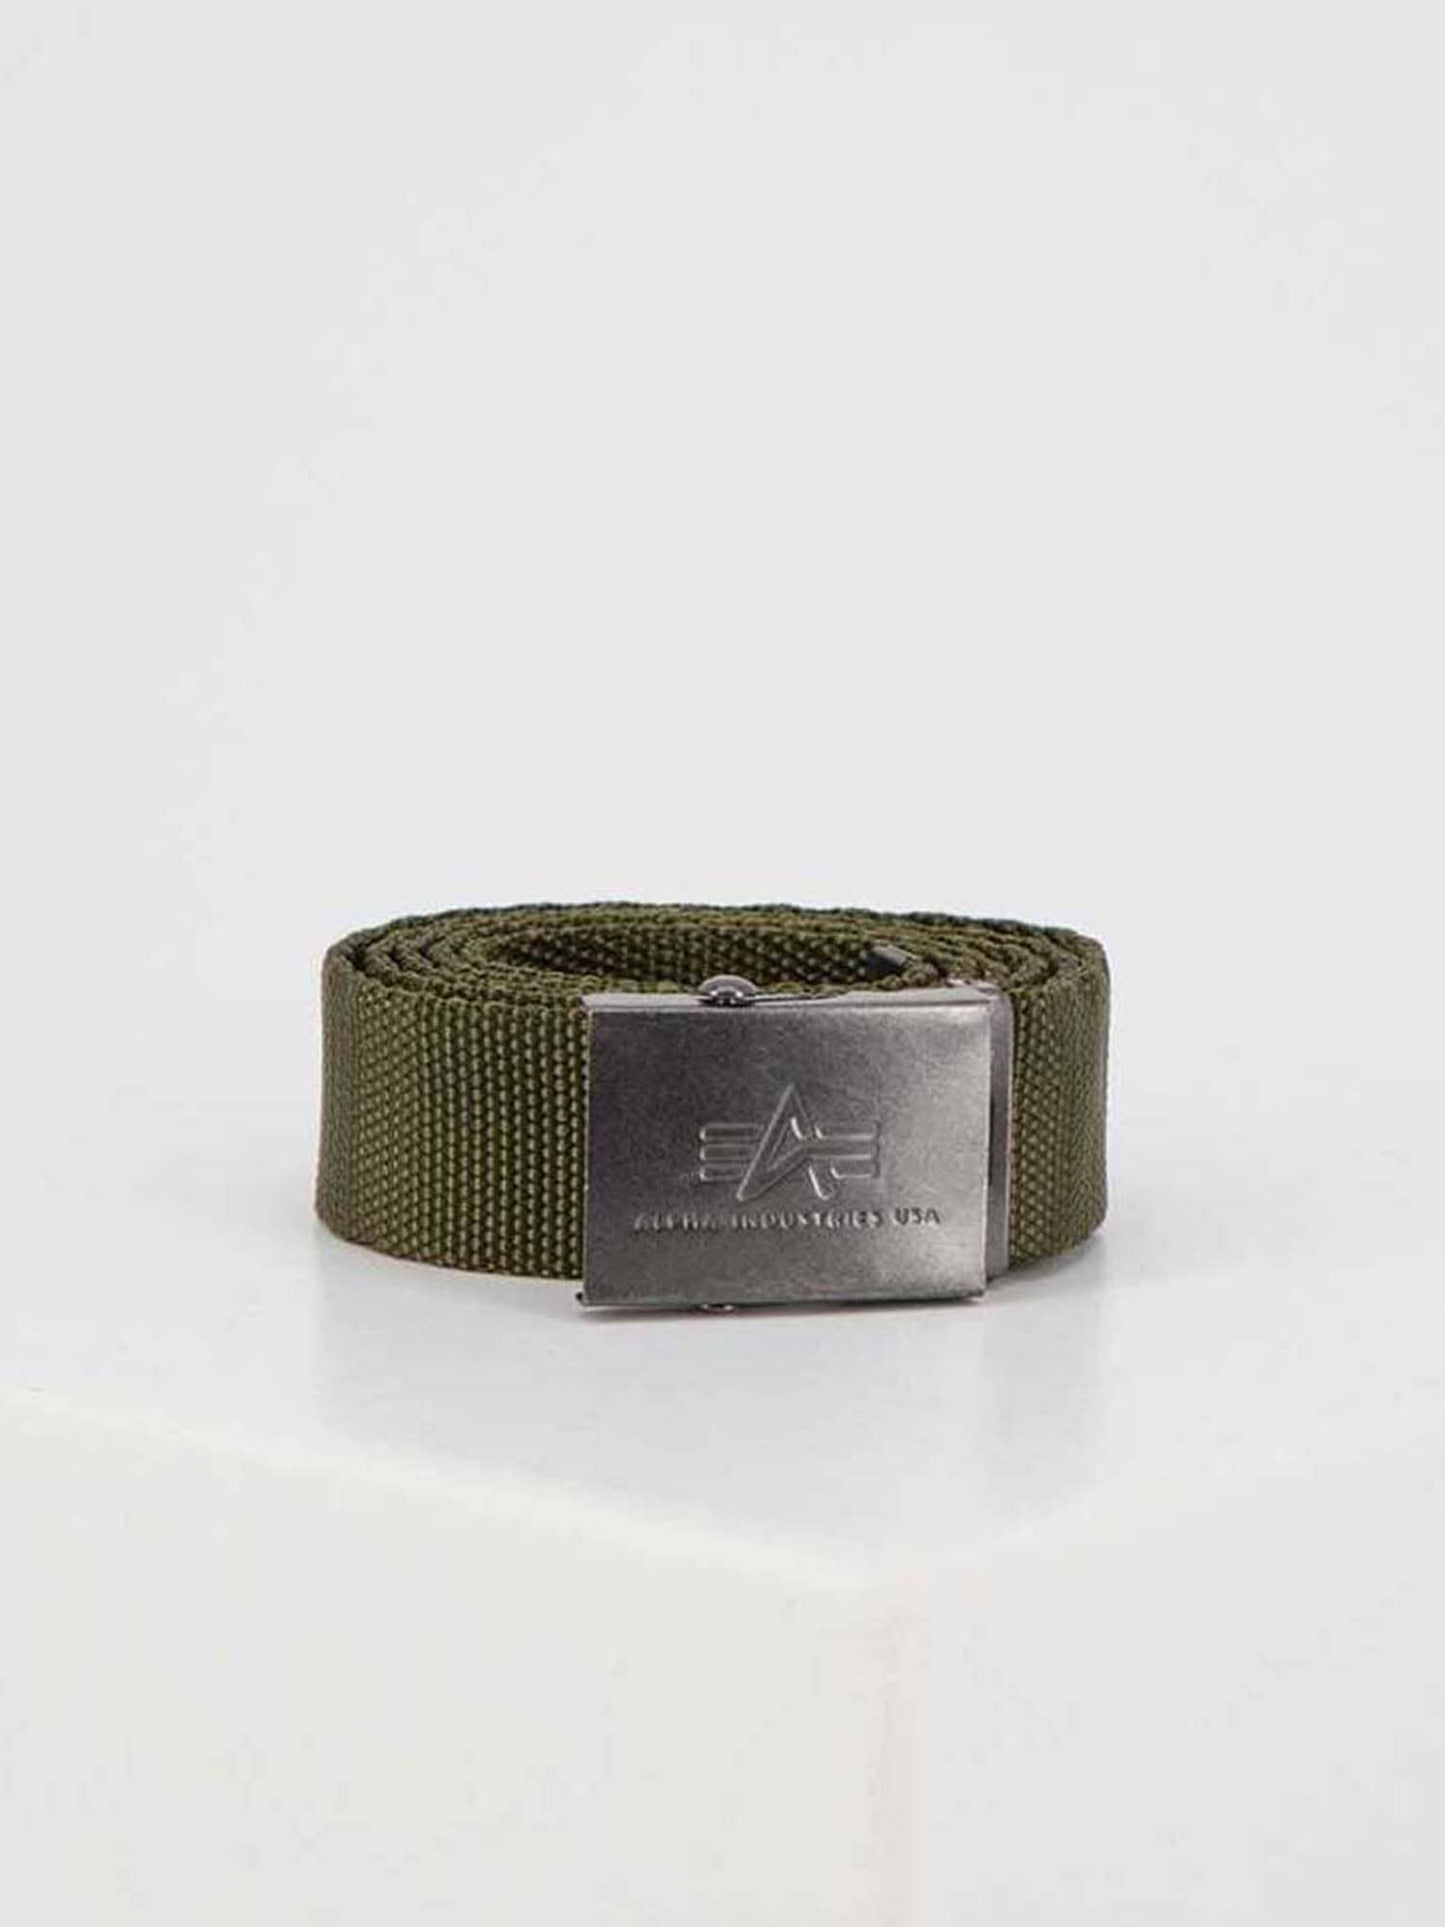 HEAVY DUTY BELT ACCESSORY Alpha Industries, Inc. OLIVE O/S 